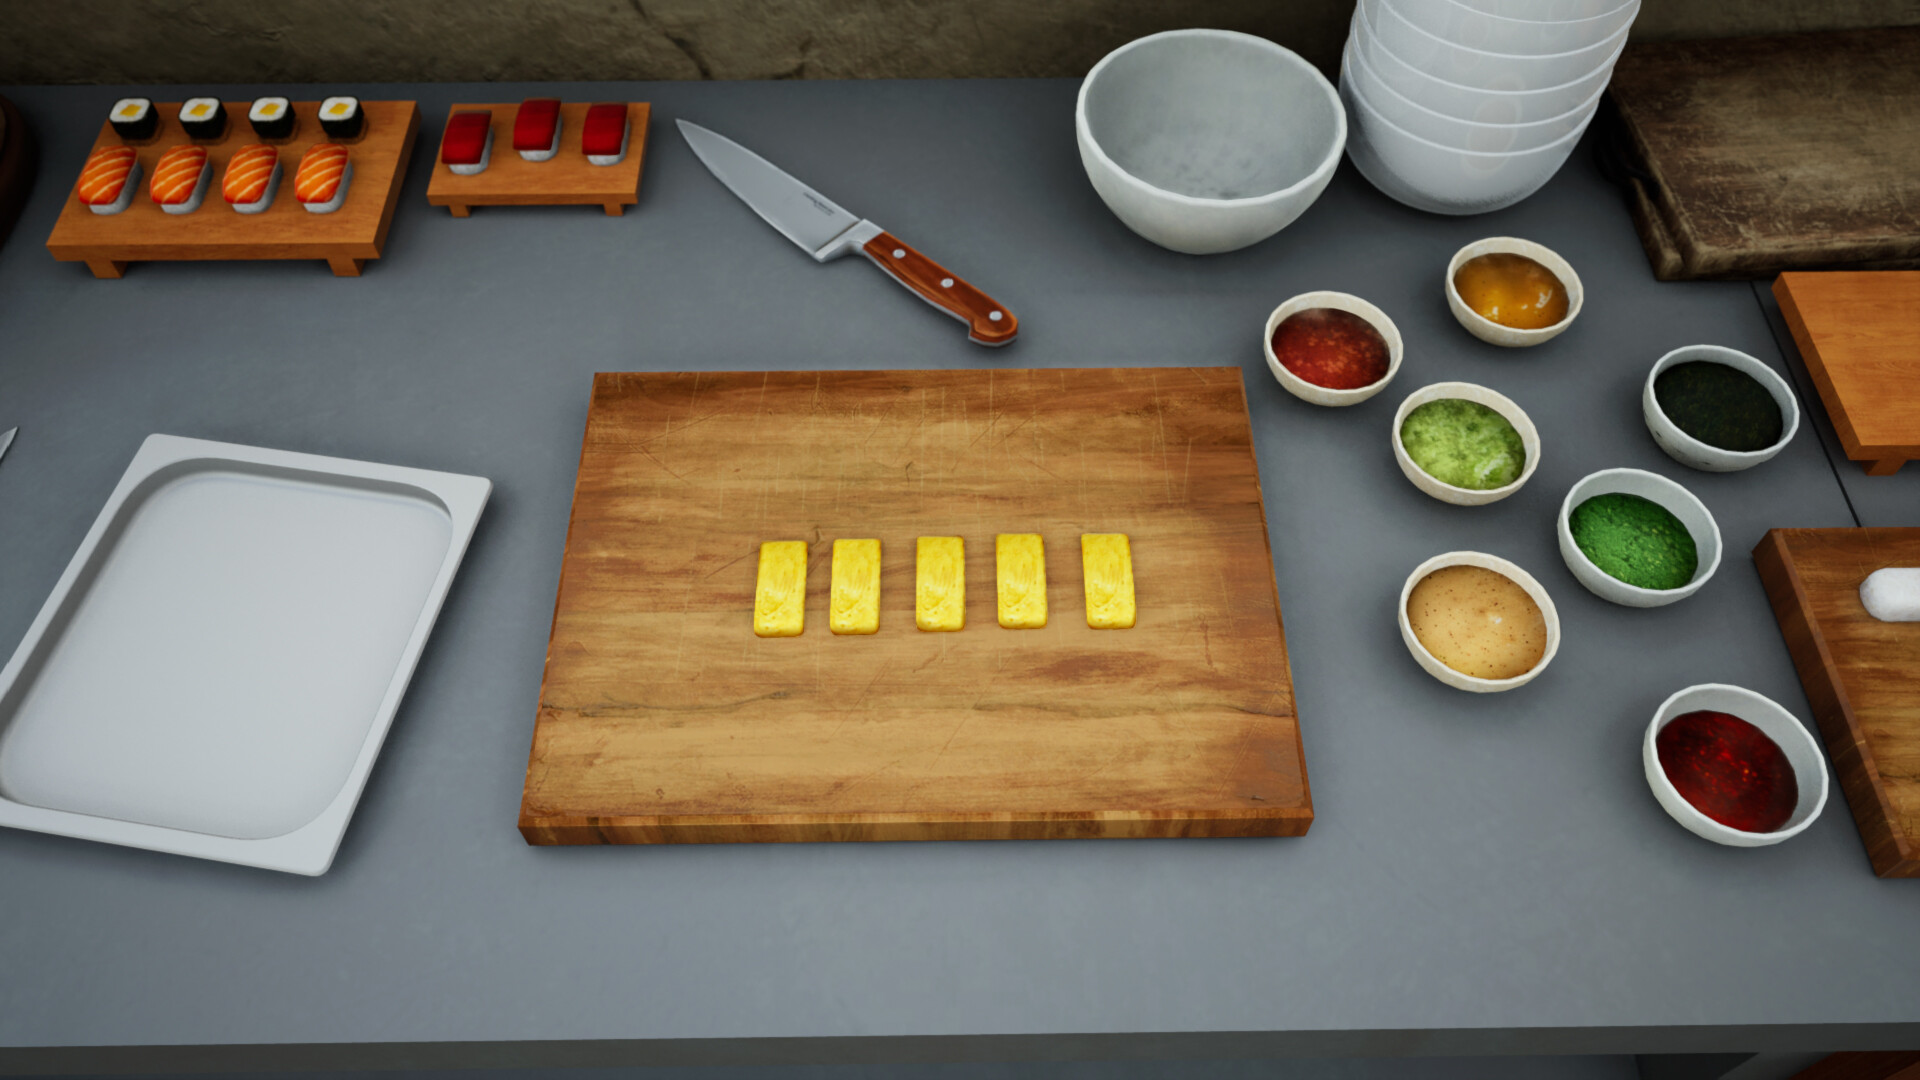 BBQ Recipe pack out now! ☀️🥓🍹 · Cooking Simulator update for 23 June 2022  · SteamDB